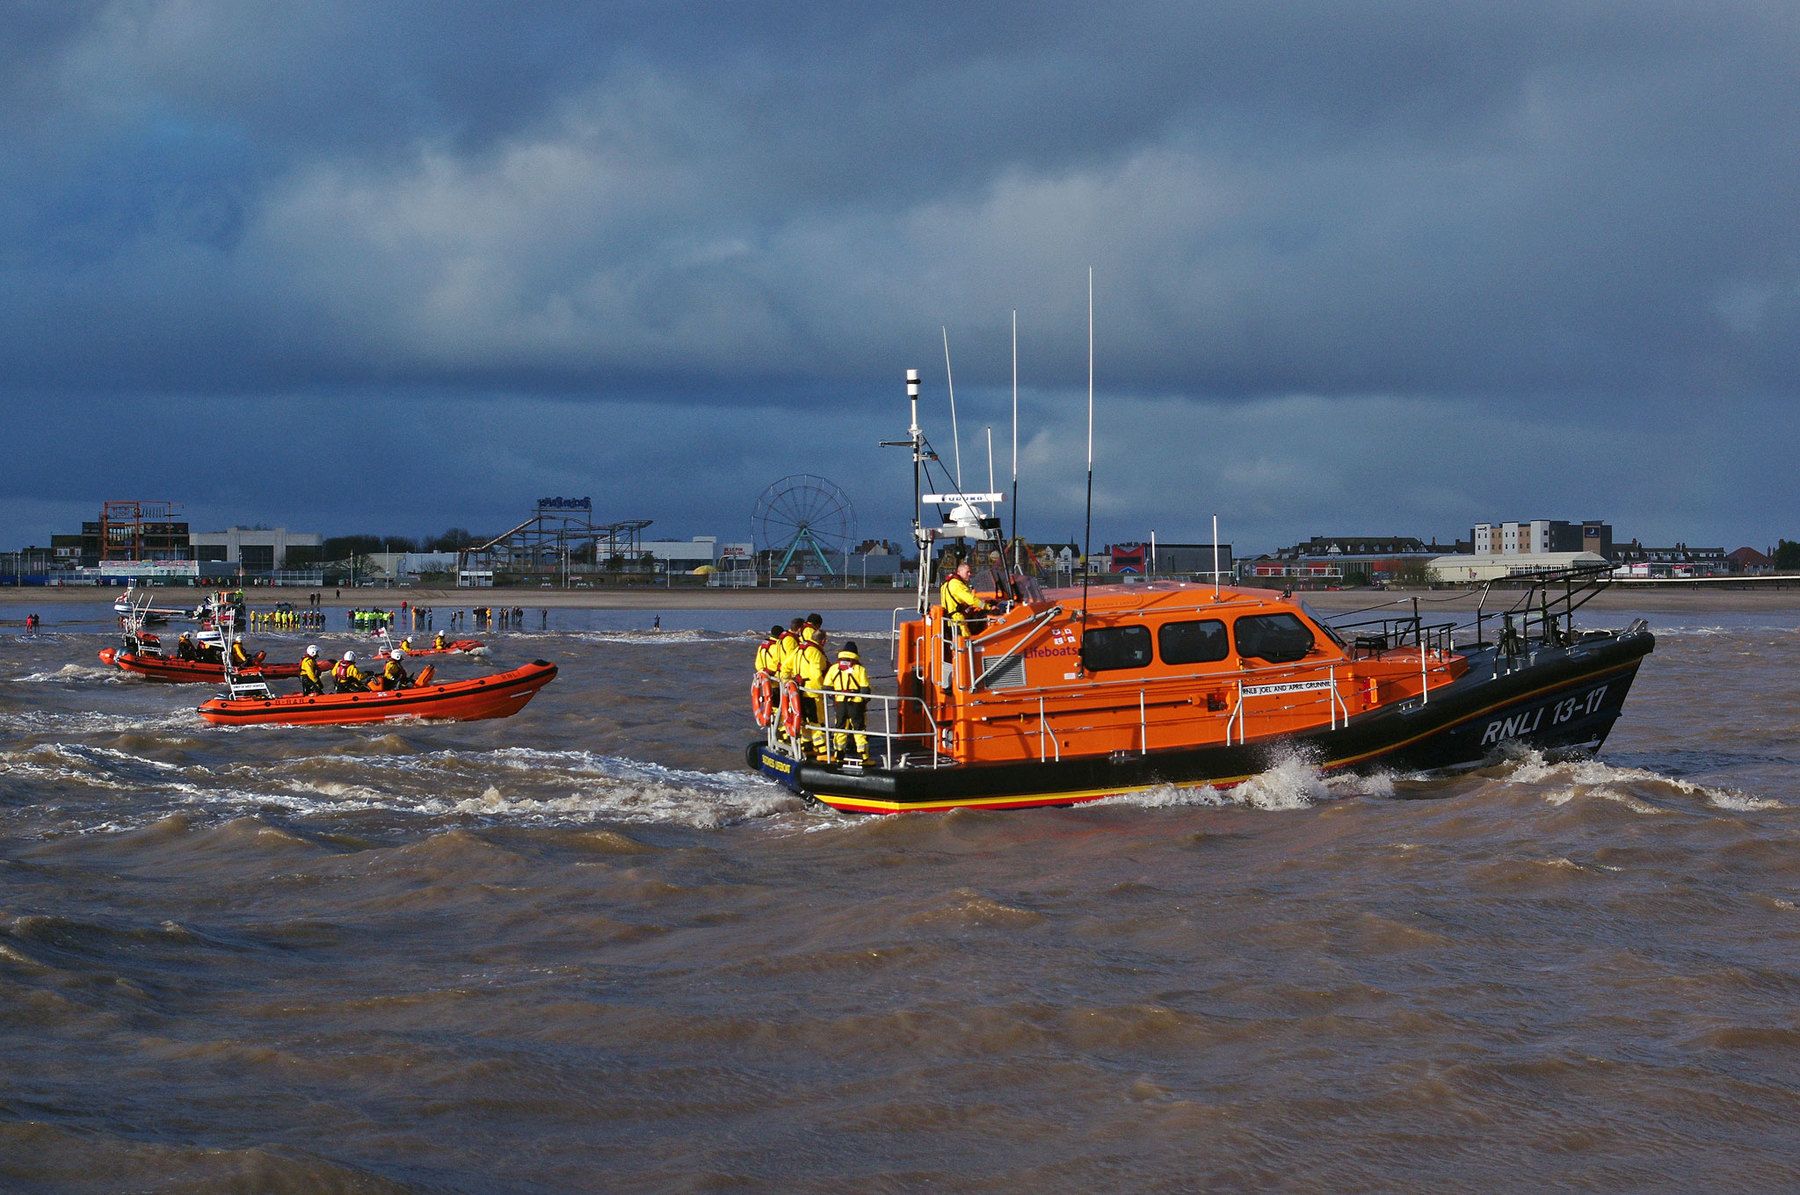 Mablethorpe, Hunstanton and both Skegness lifeboats, along with Wells and Humber, line up for a 'fly-past' the beach, 5/12/21